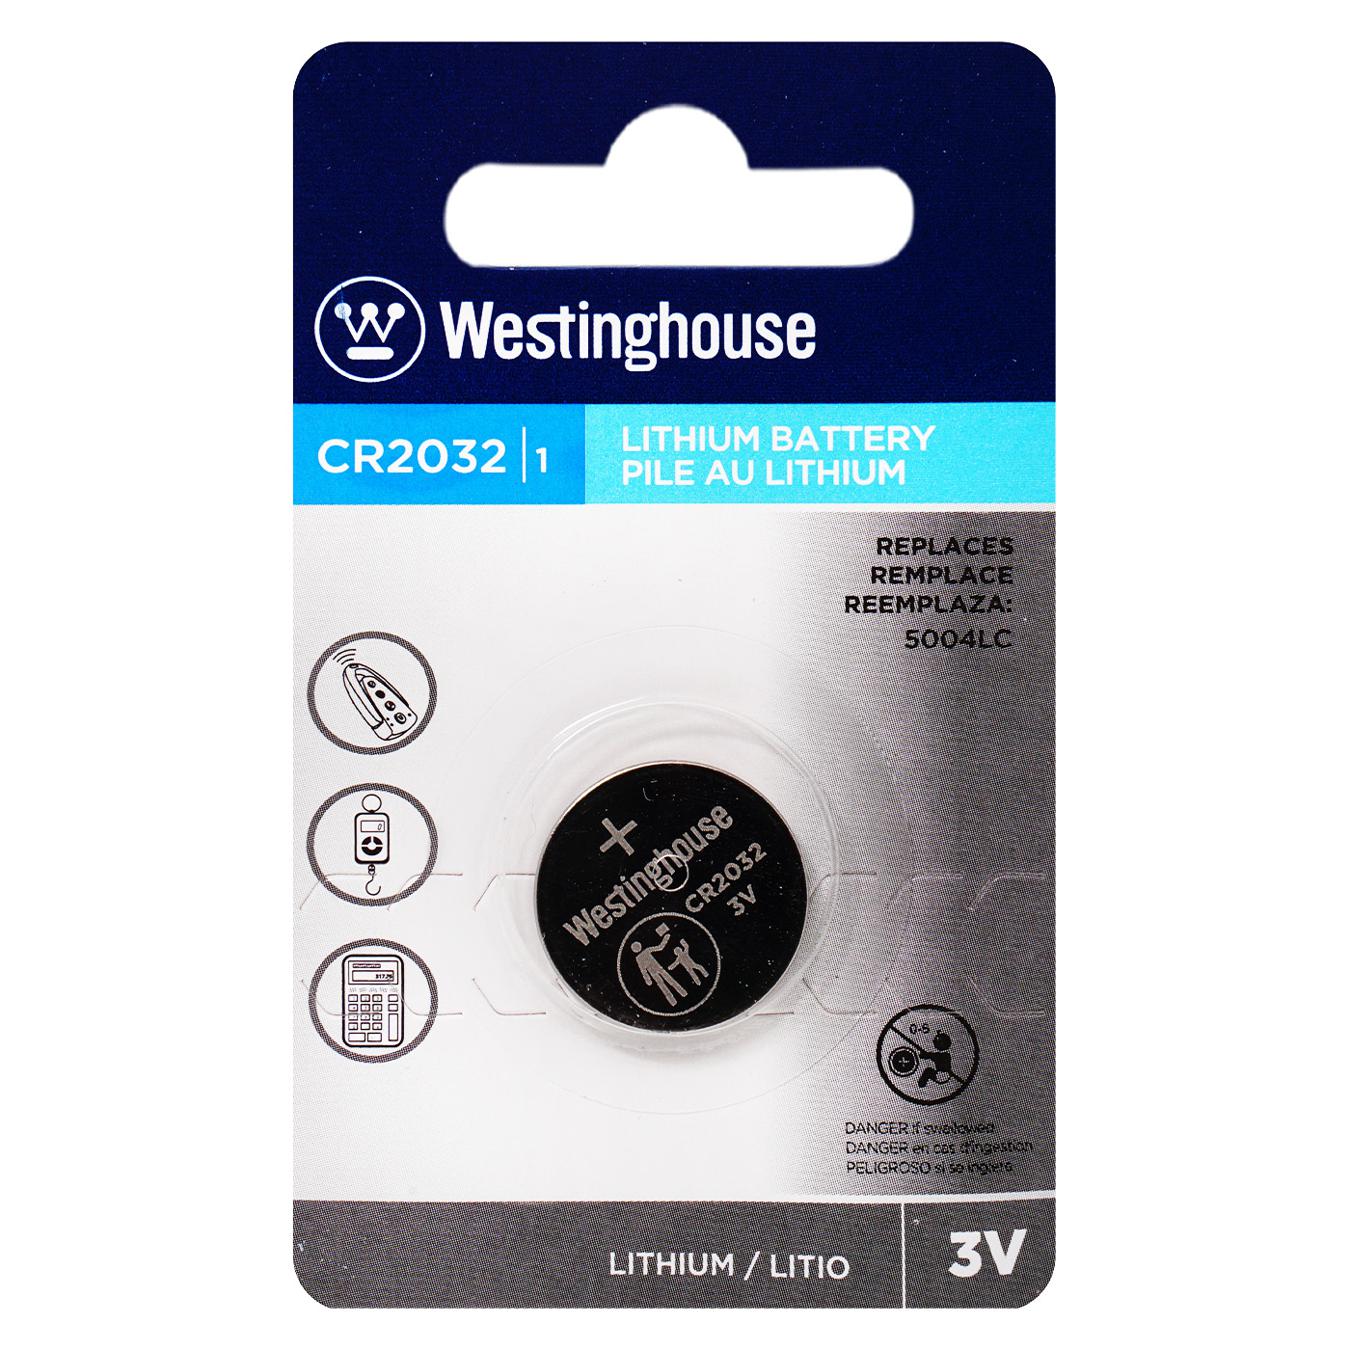 Lithium battery Westinghouse CR2032 1pc